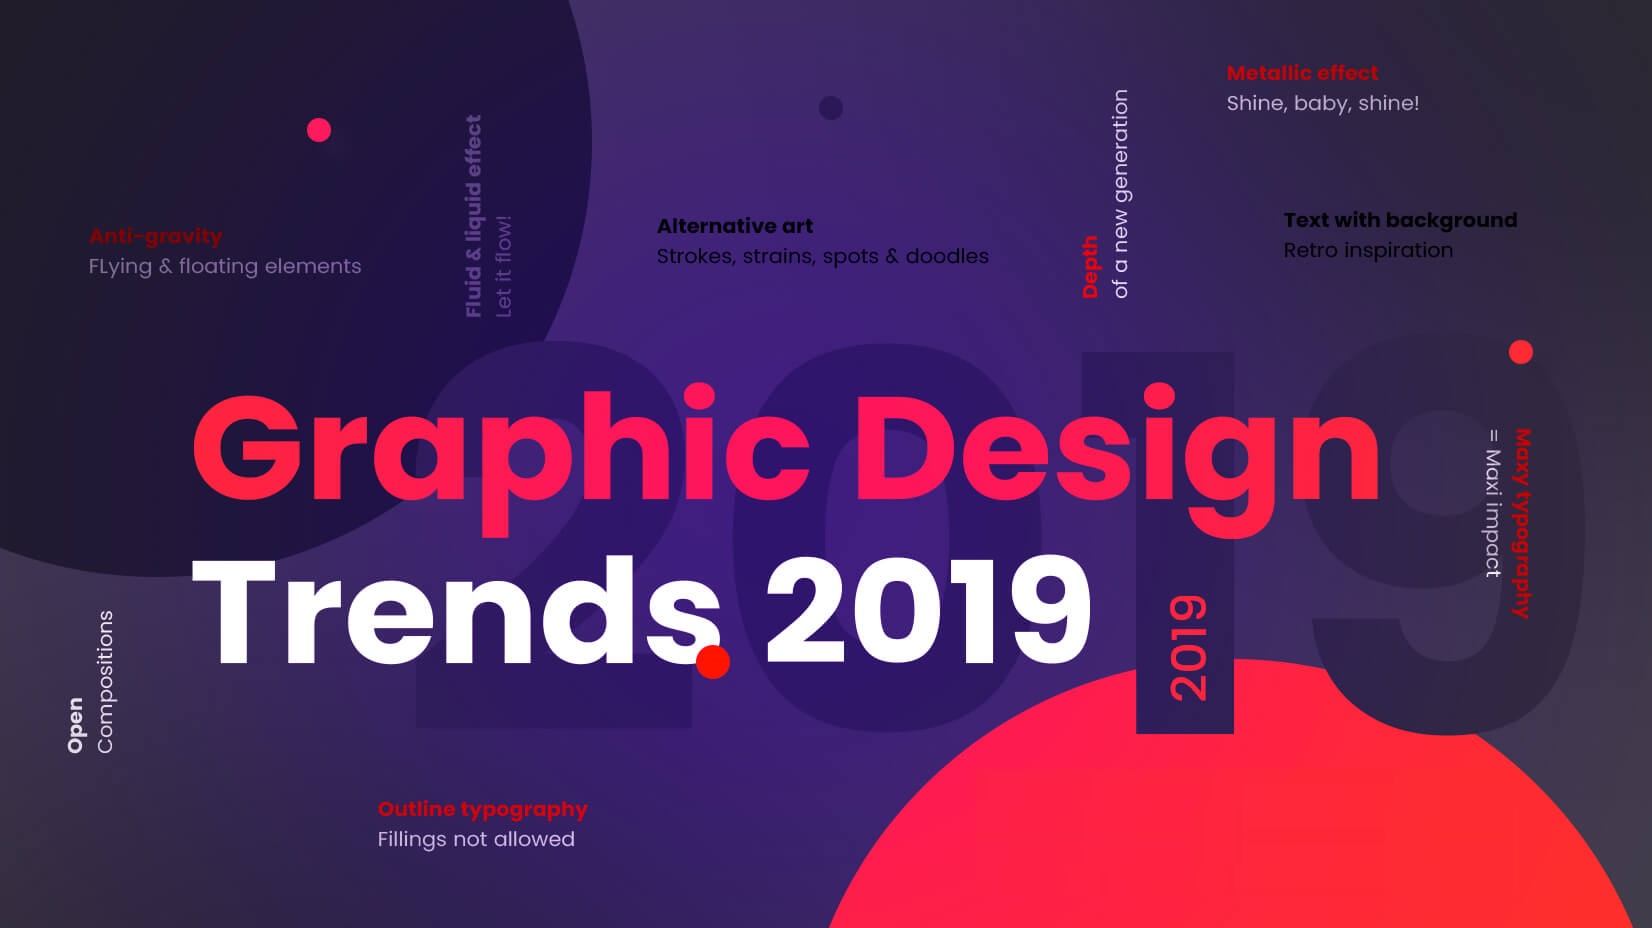 The 10 most inspirational graphic design trends for 2019